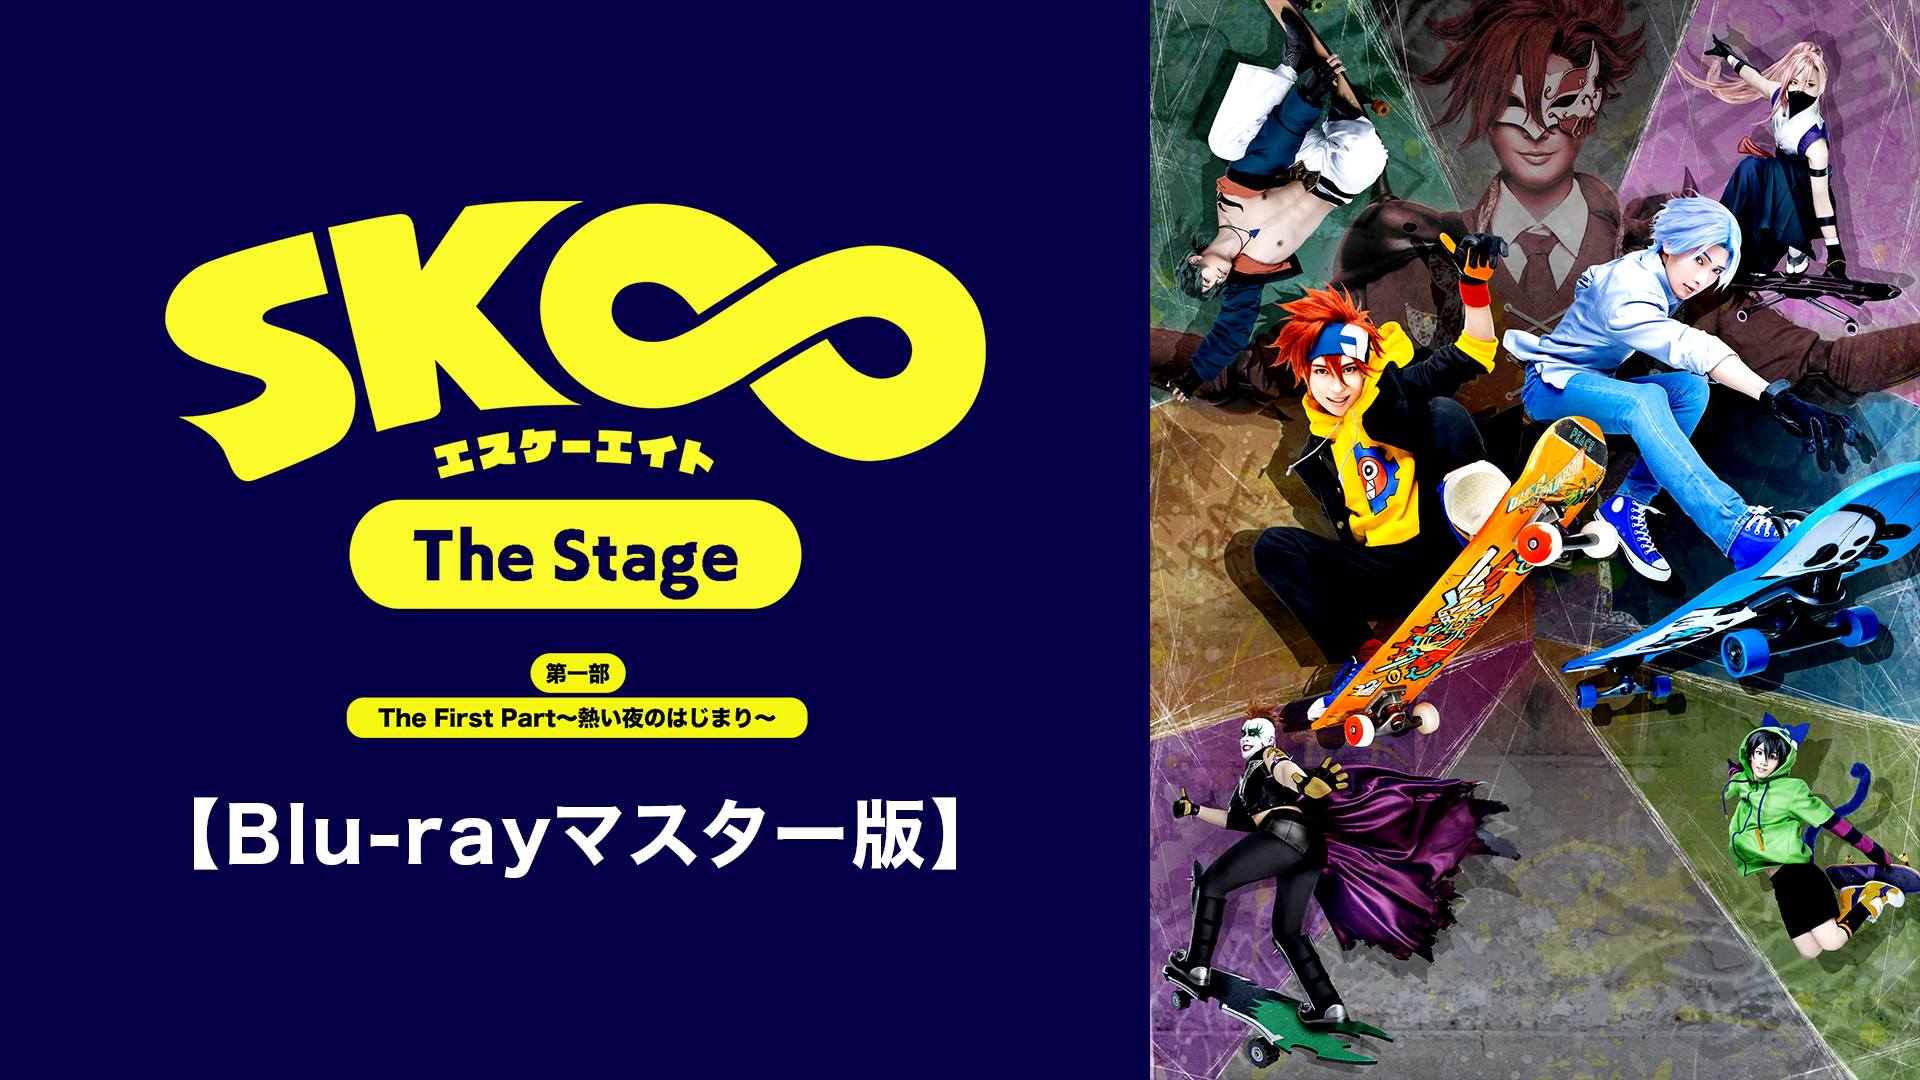 SK∞ エスケーエイト The Stage」第一部 The First Part～熱い夜の 